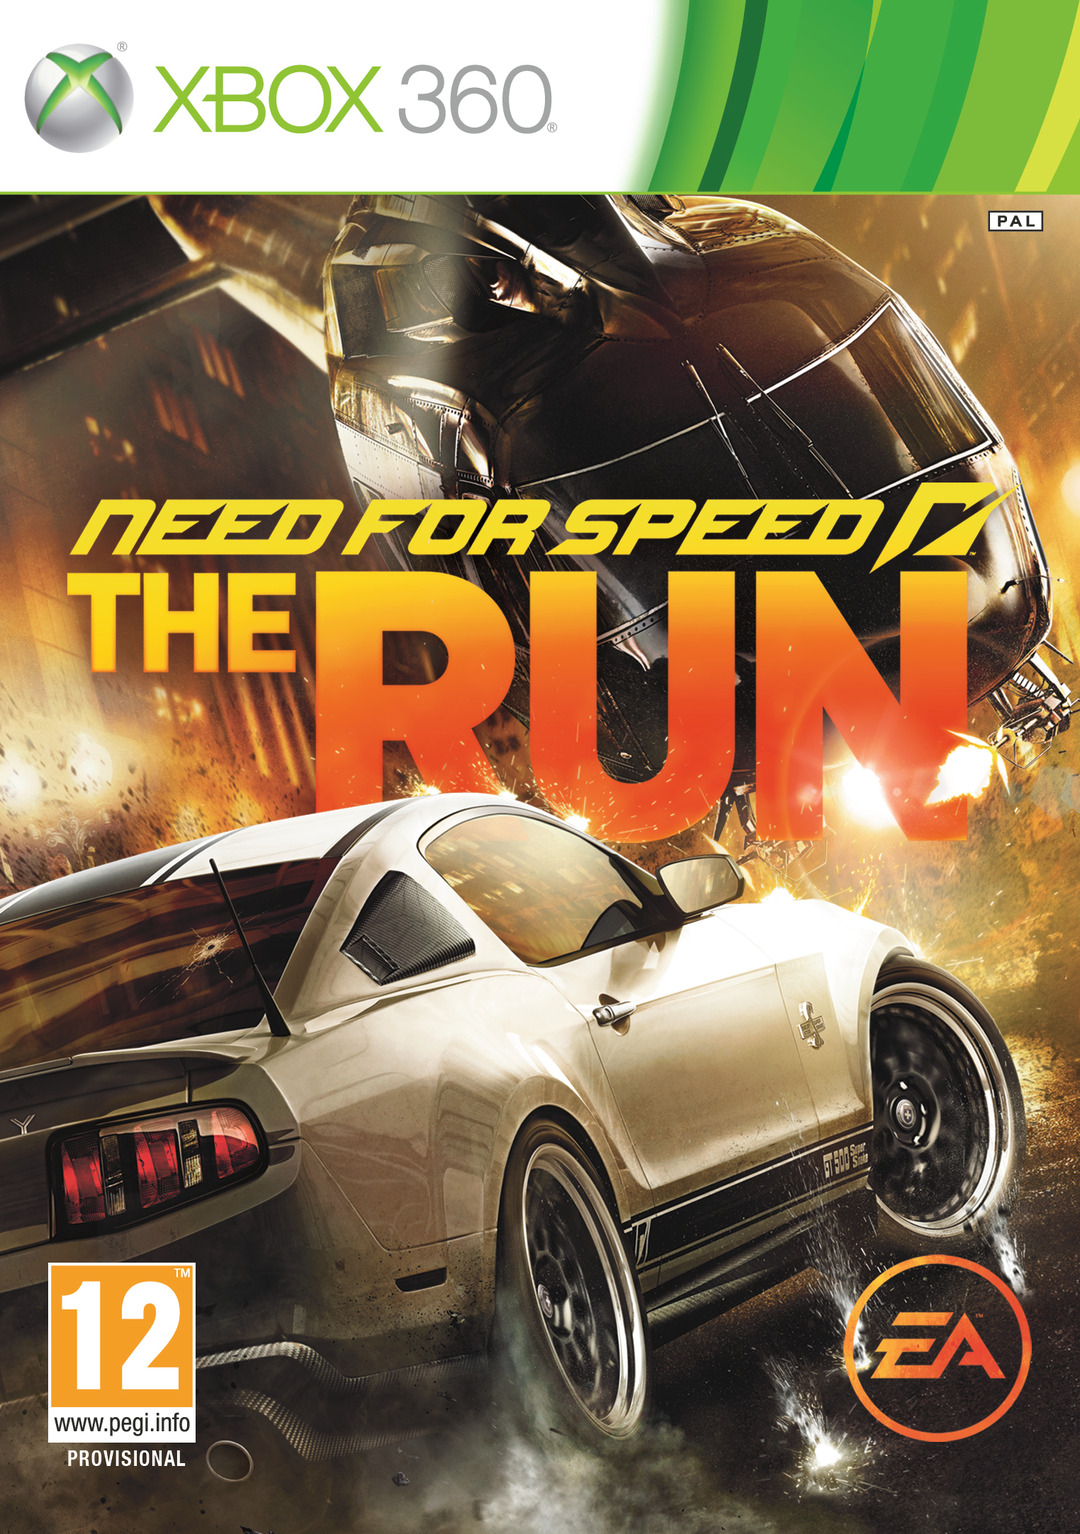 All Gaming: Download Need For Speed The Run (xbox 360 game) Free